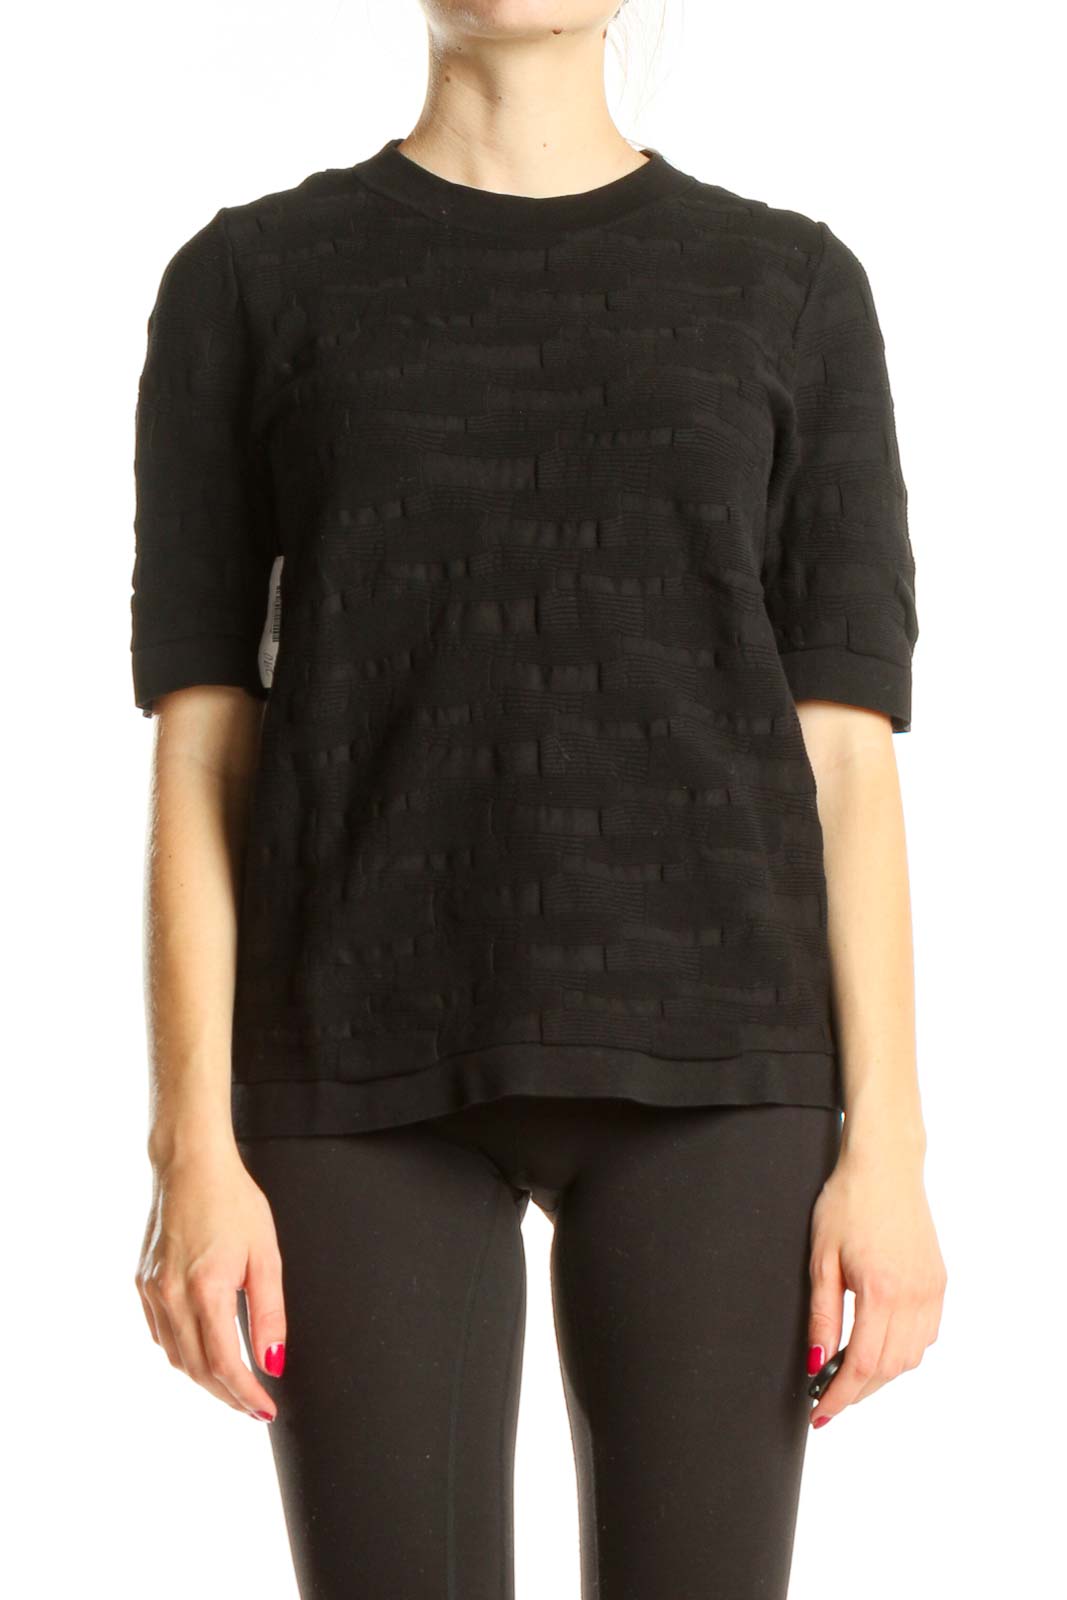 Black Knitted Textured Classic Top Front